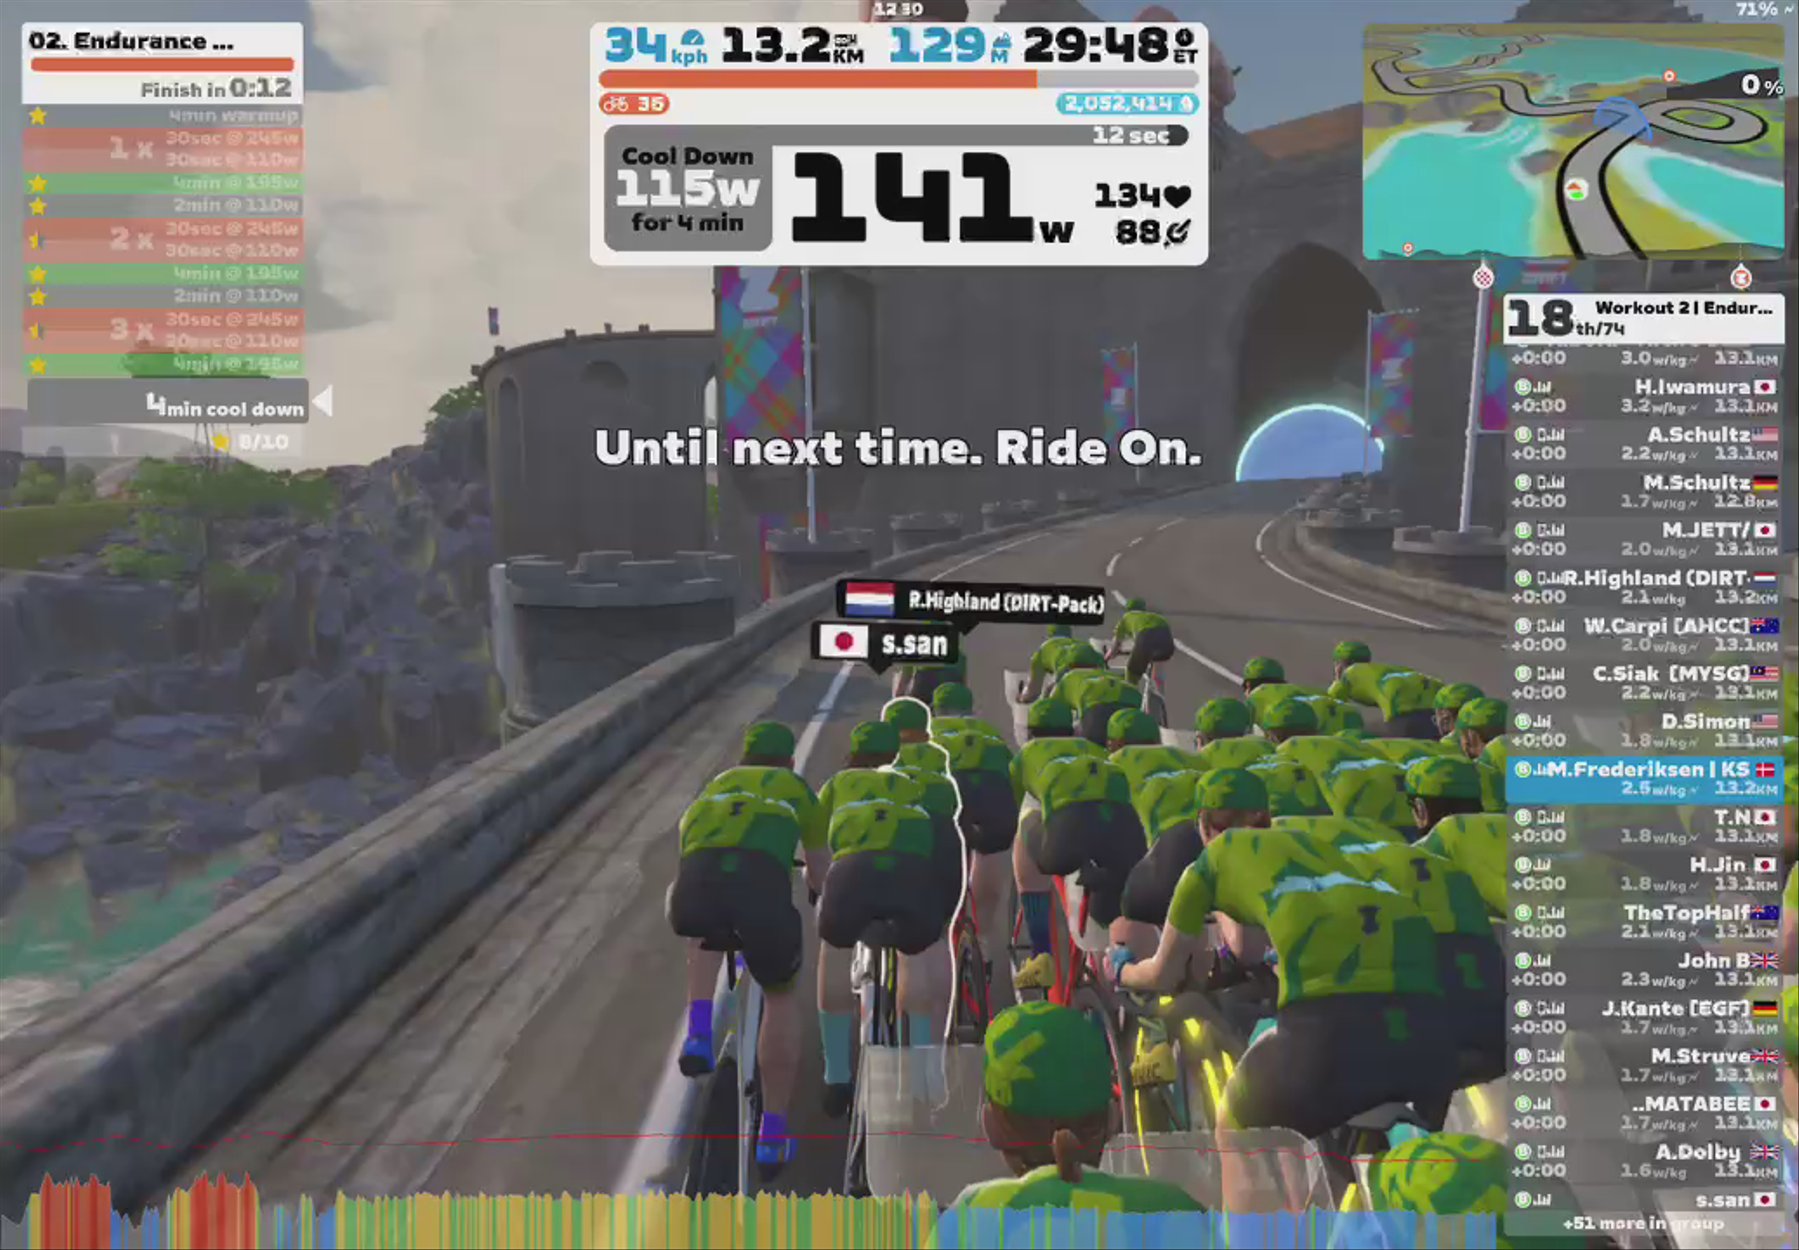 Zwift - Group Workout: Short - Endurance Escalator  on The Muckle Yin in Scotland